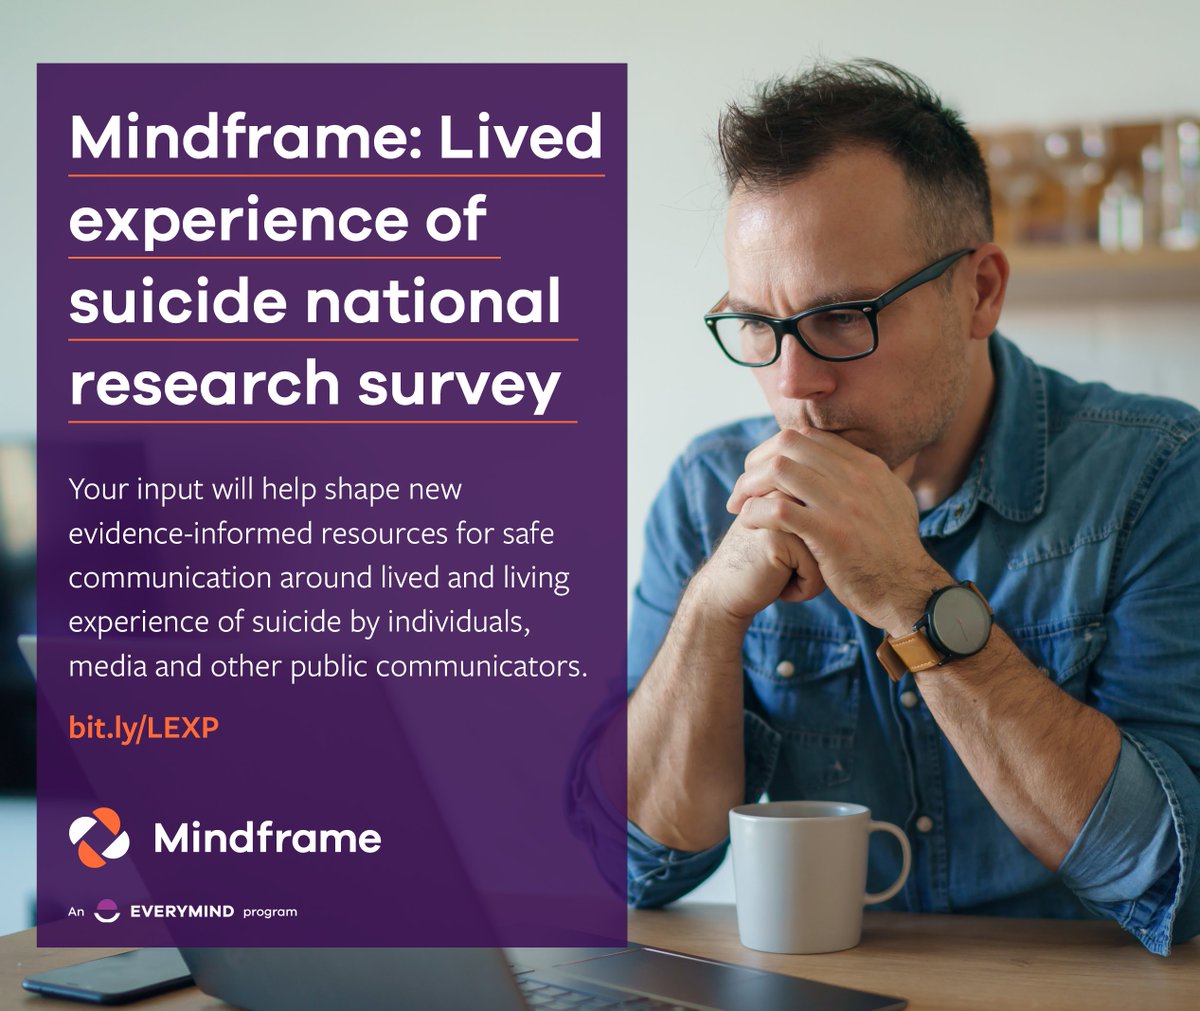 Everymind's lived experience of suicide national research survey closes 31 March. Read more about how you can take part in this project aimed at helping individuals, along with media and others who may be assisting them, in sharing their stories: bit.ly/LEXP